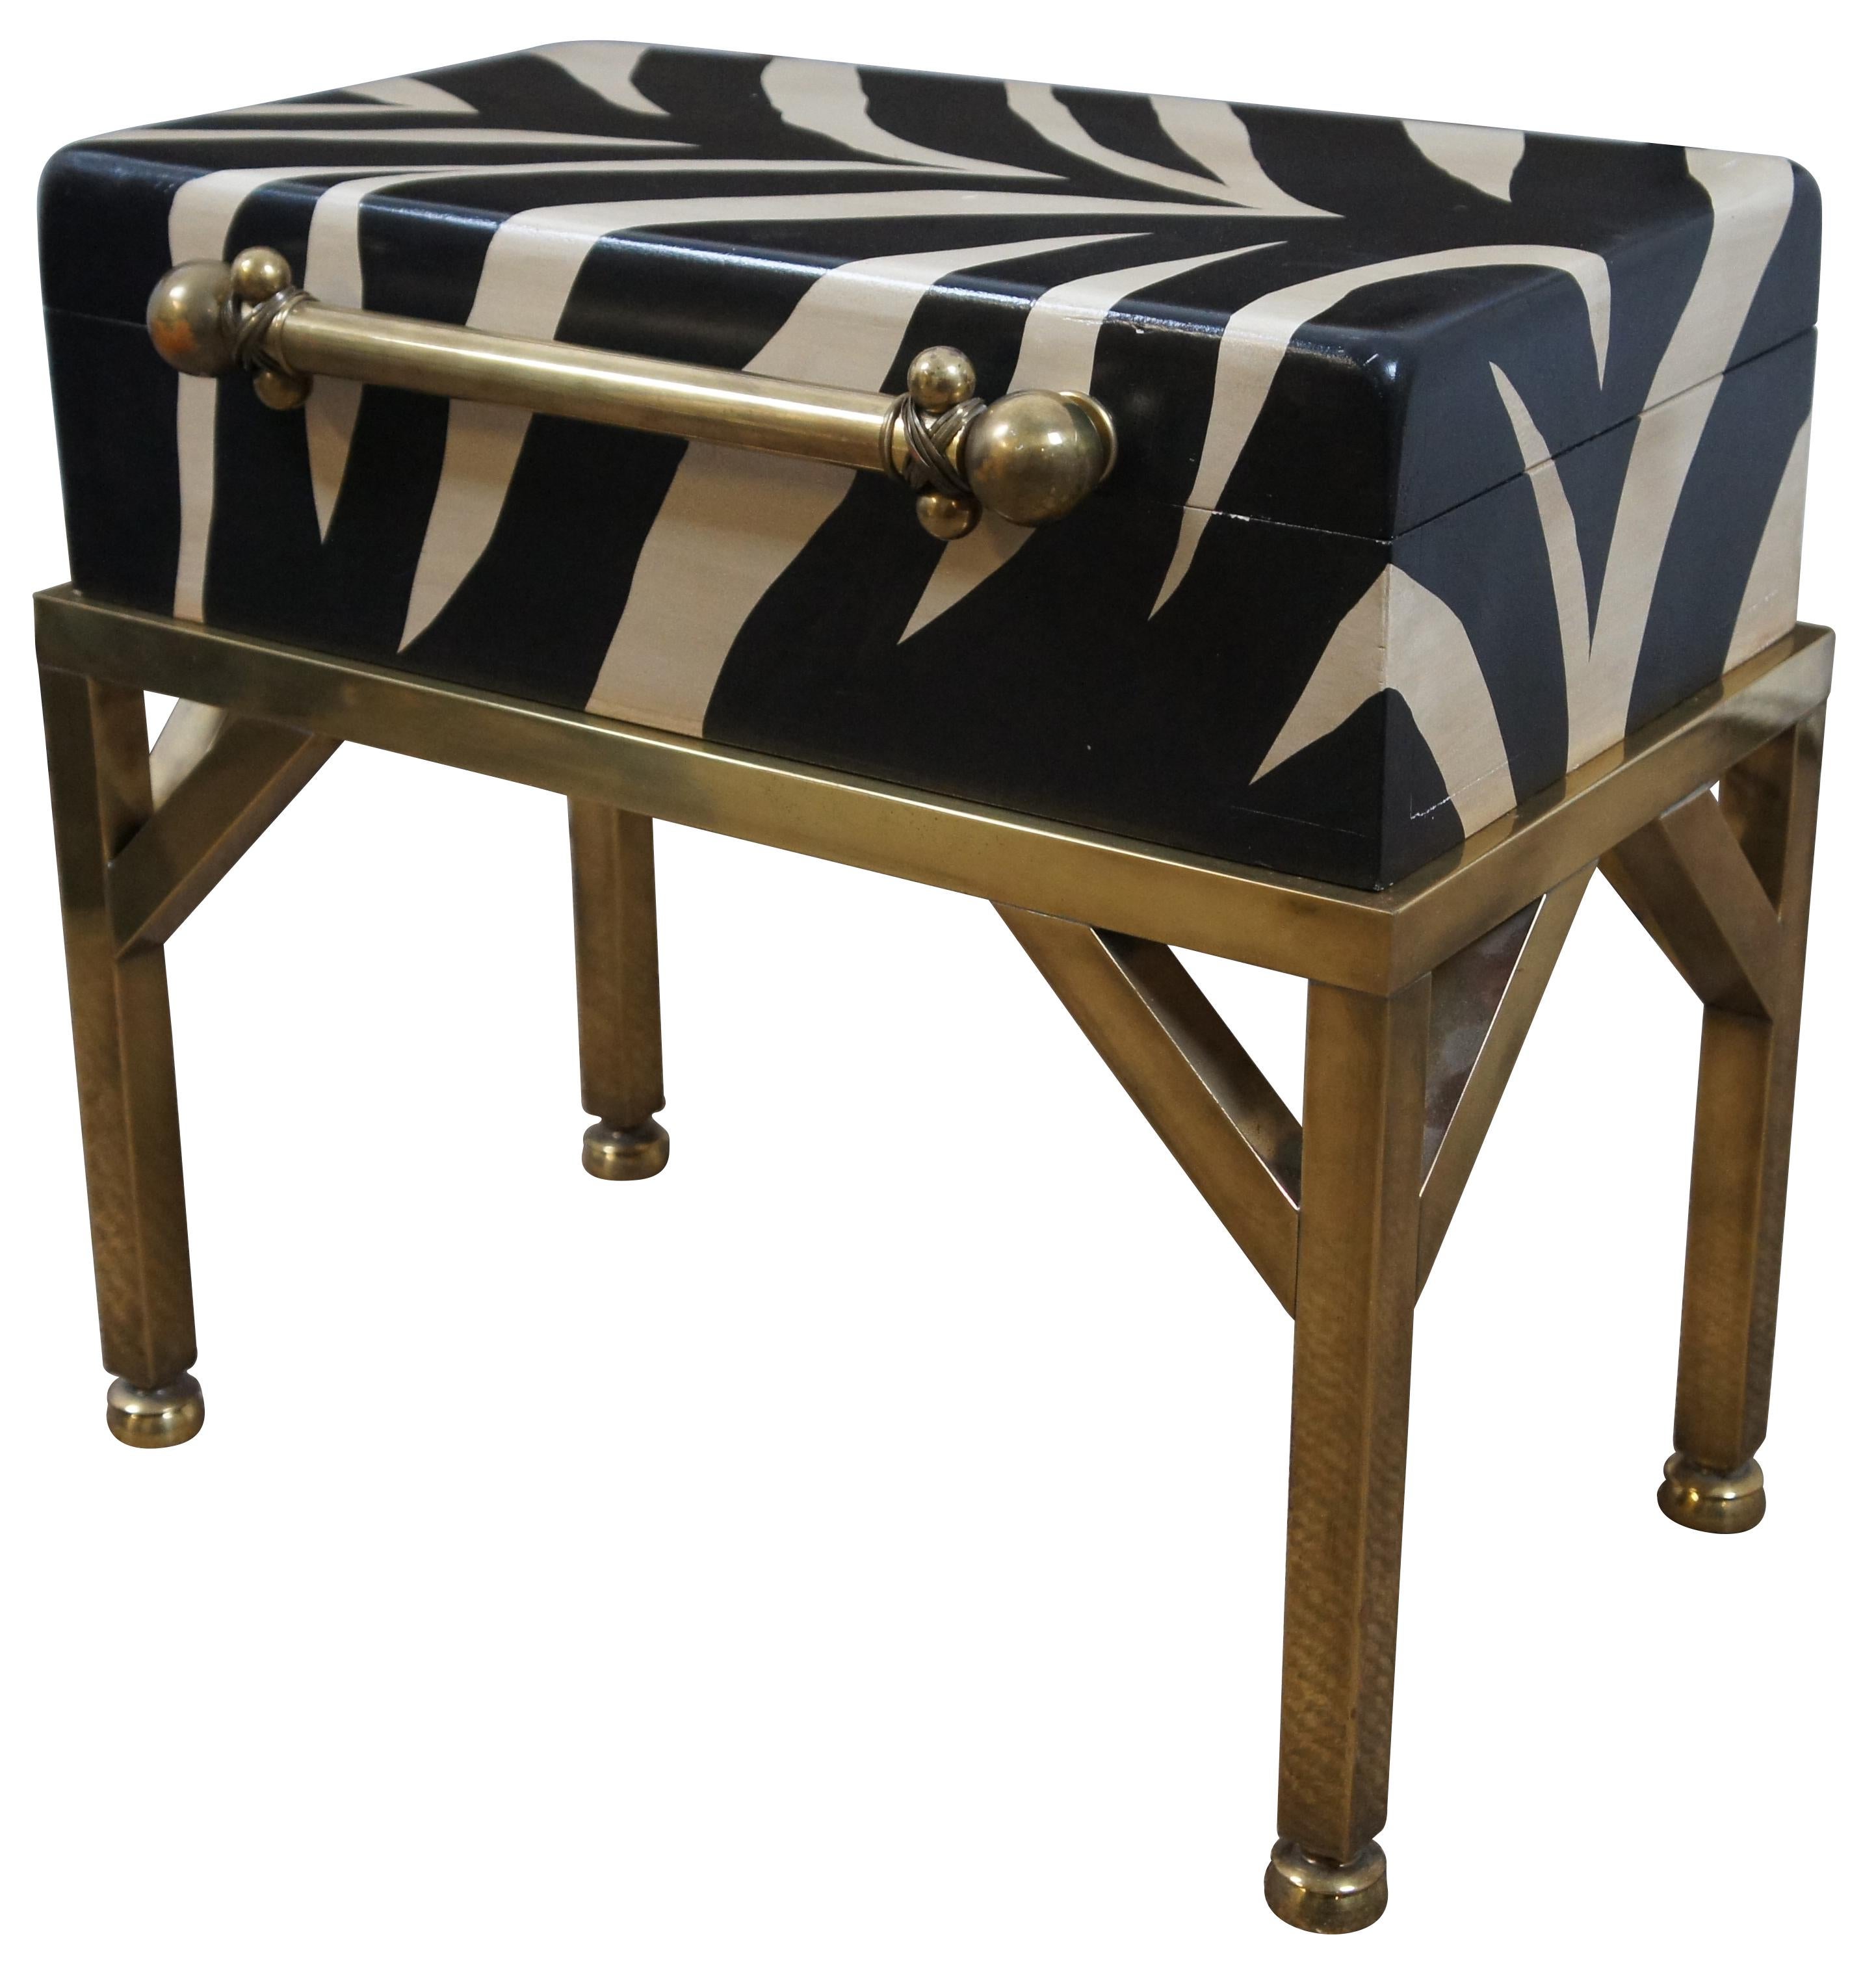 Vintage Hart Associates lidded keepsake storage box side or end table featuring a zebra patterned rectangular chest on stand with tubular brass bar along the front. Measure: 21